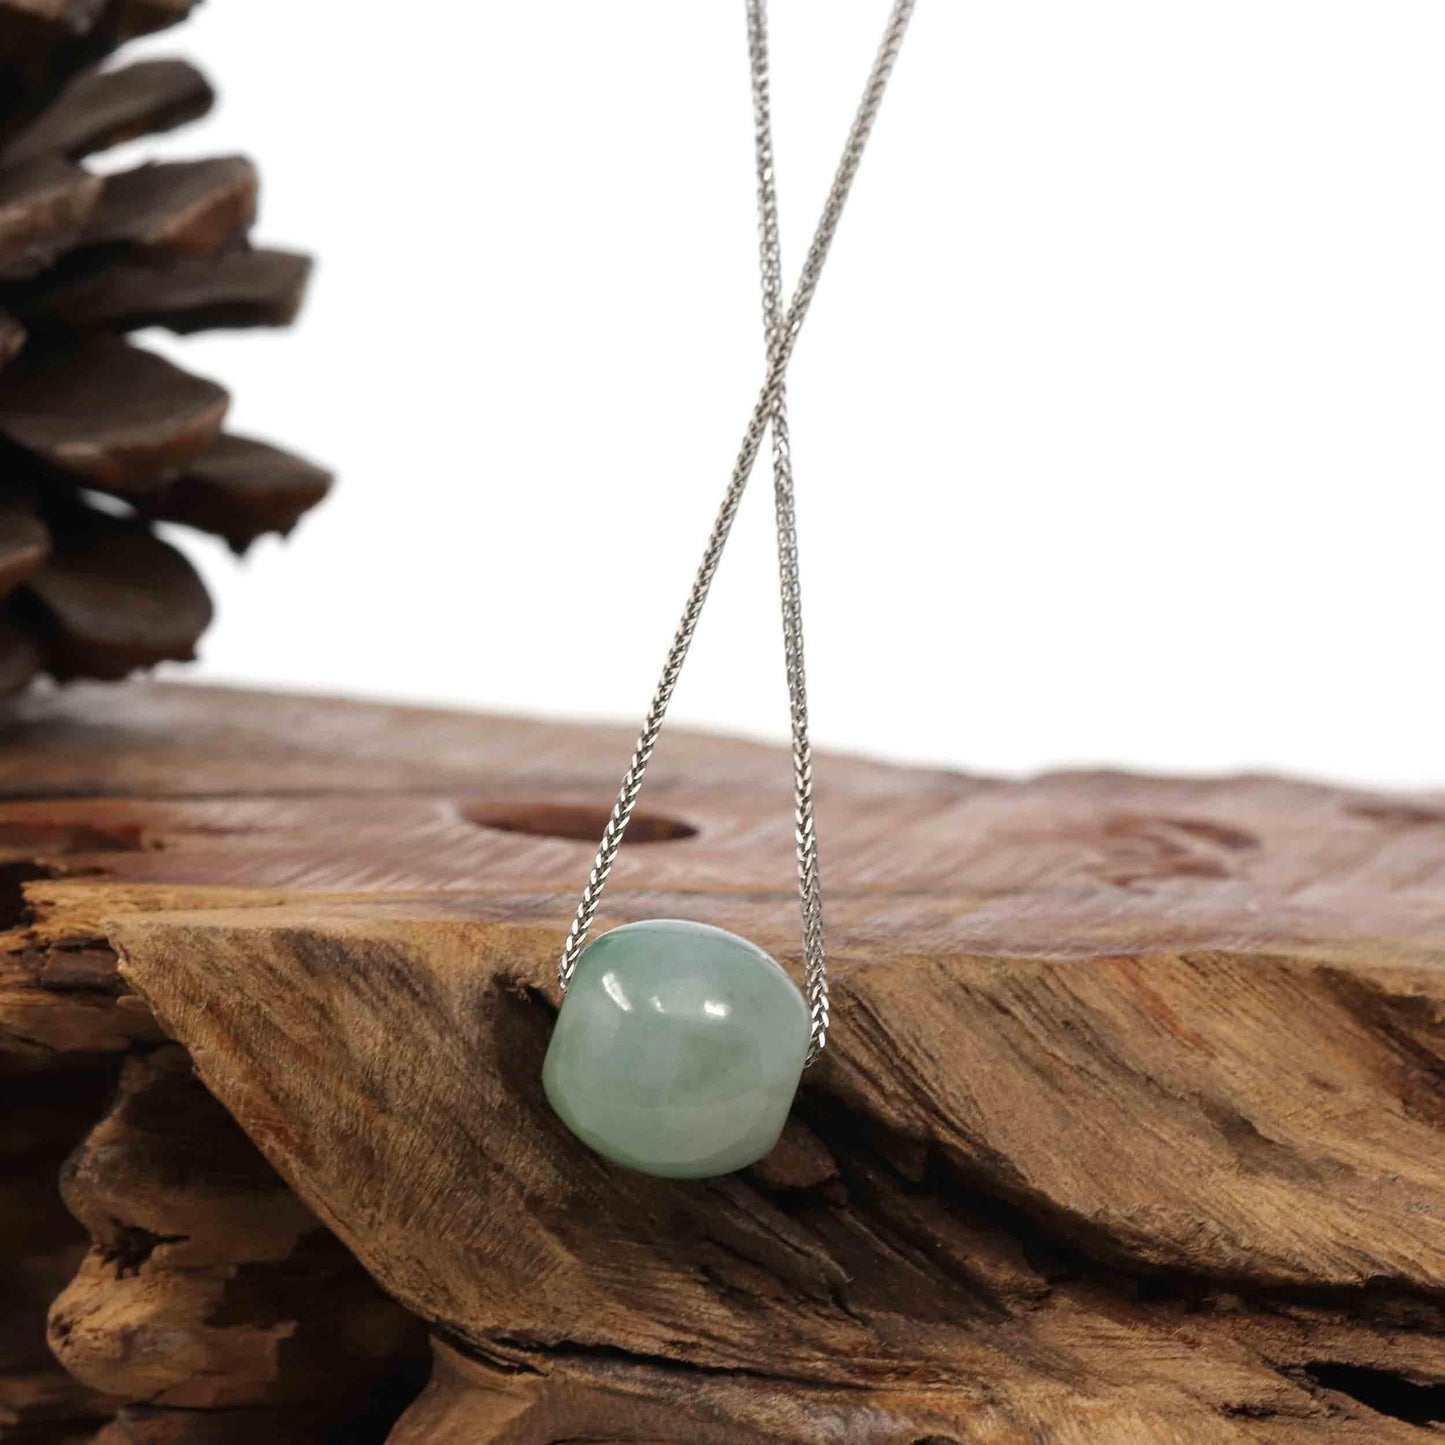 RealJade Co. Jade Pendant Necklace  "Good Luck Button" Necklace Rich Forest Green Jade Lucky TongTong Pendant Necklace